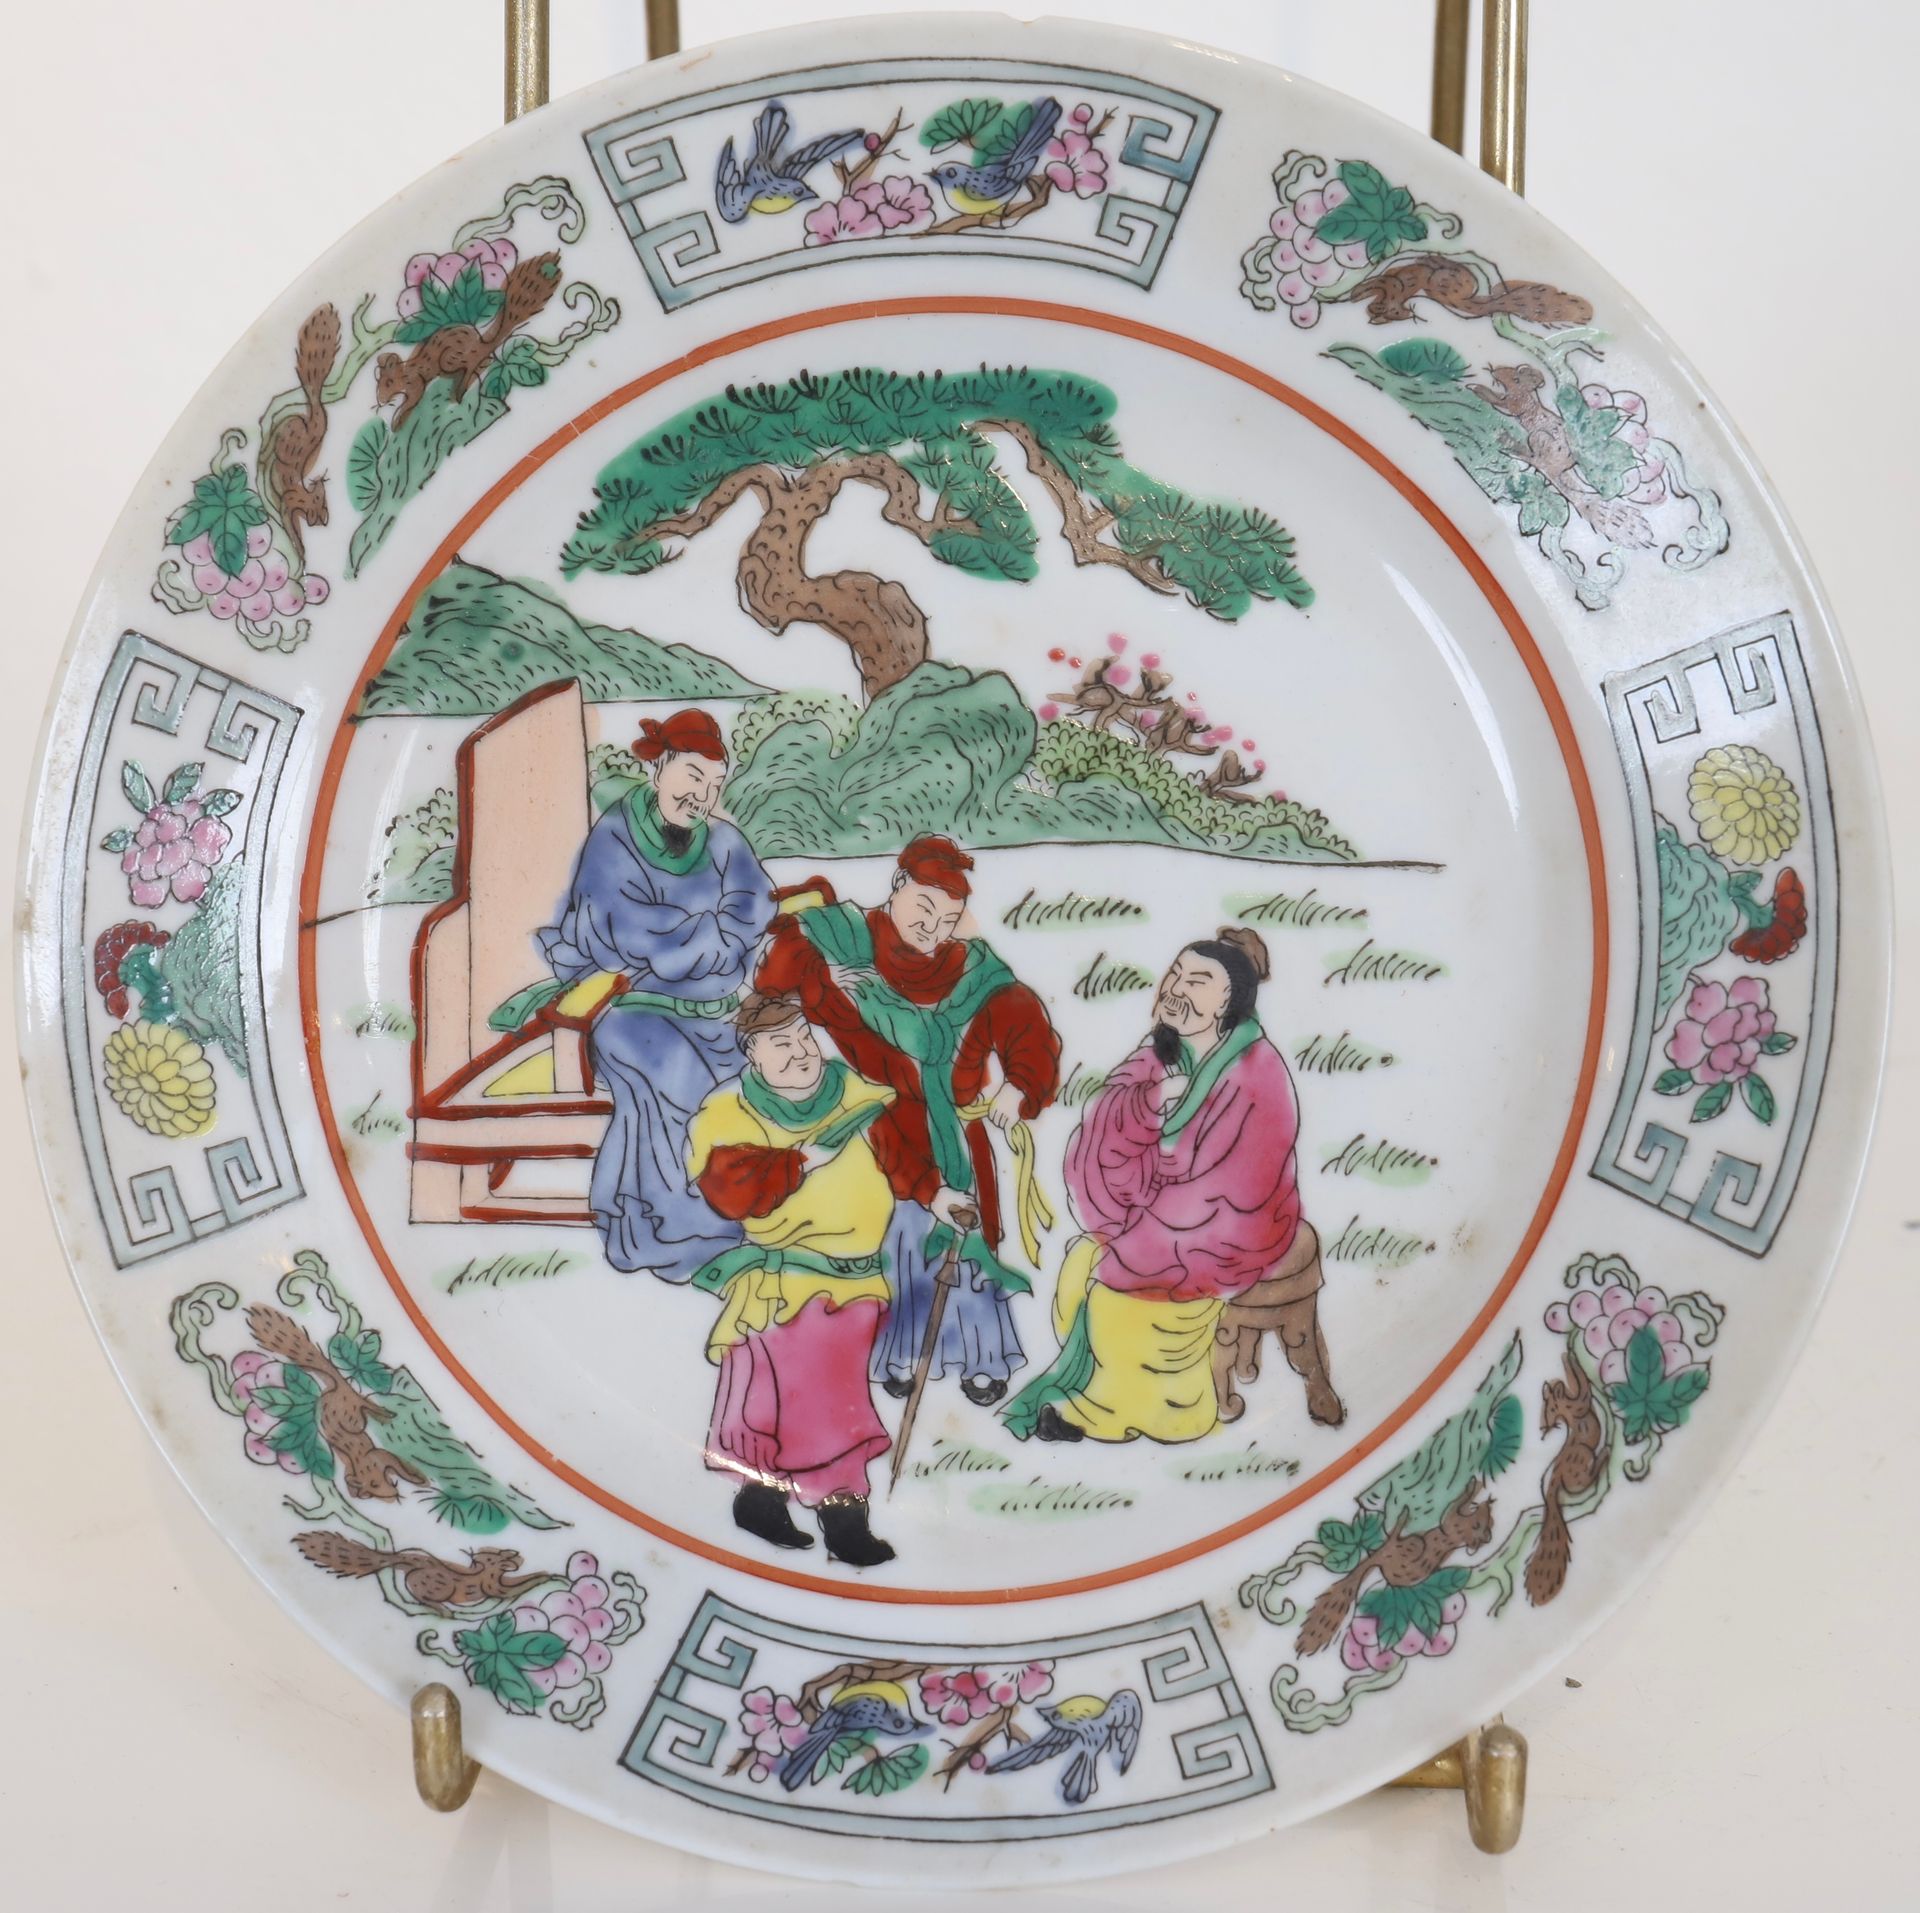 Null Plate - China
In polychrome porcelain with figures.
Stamped under the base.&hellip;